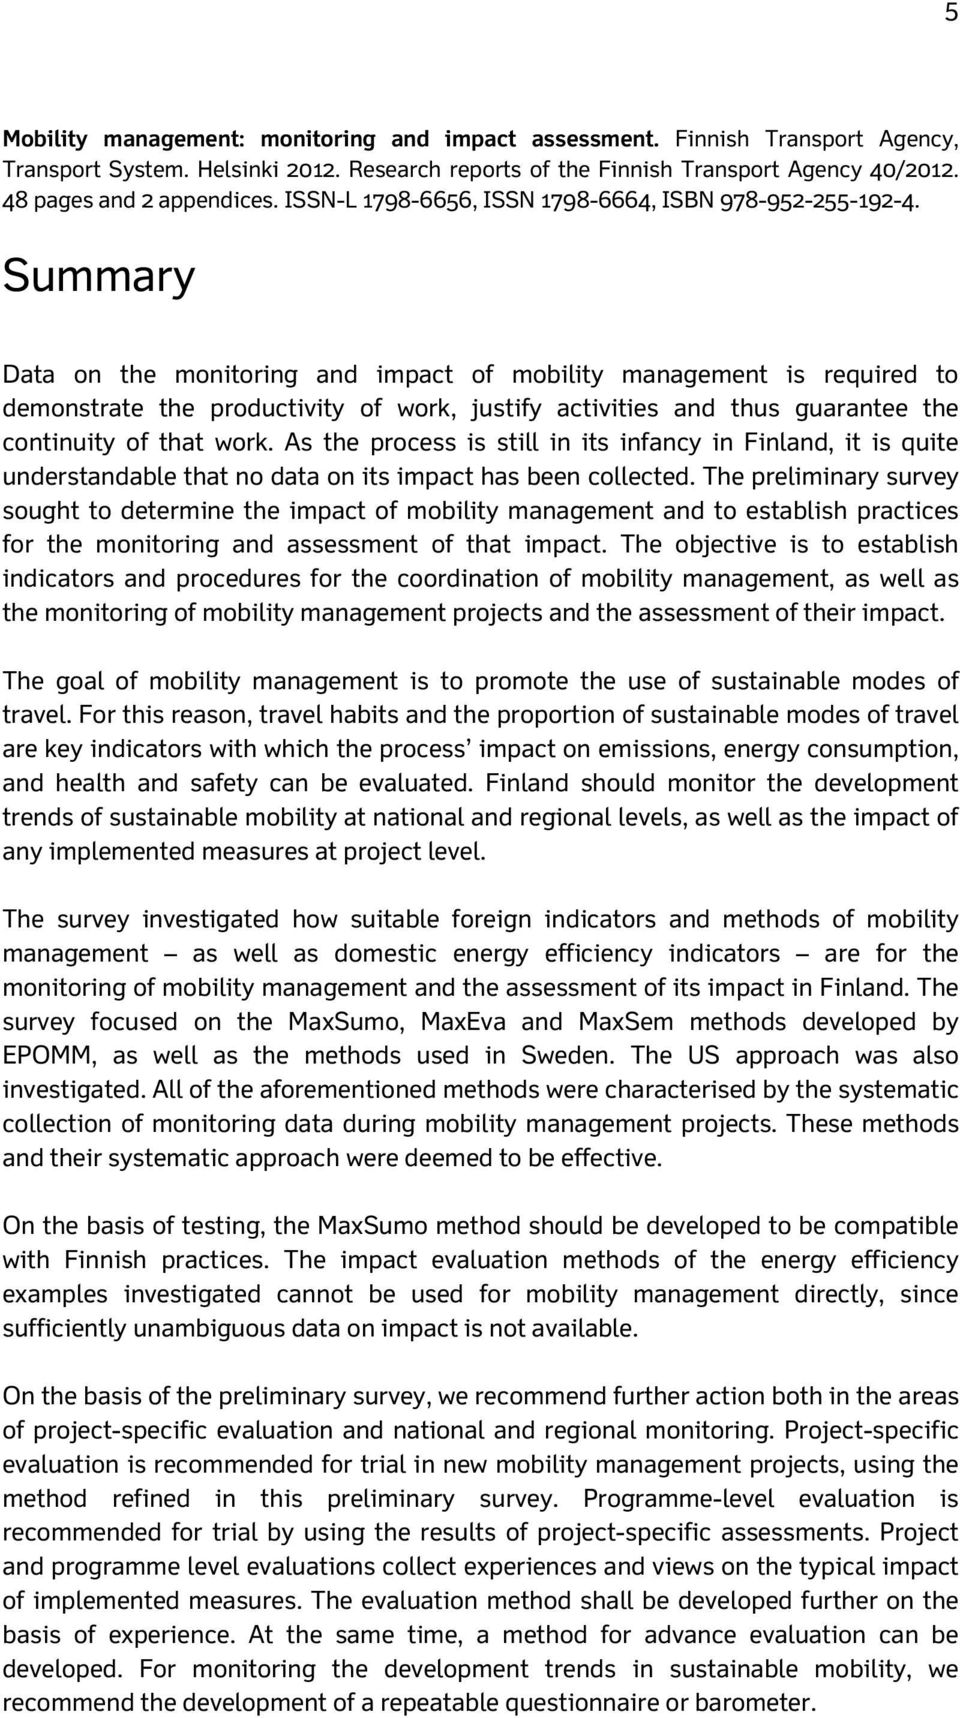 Summary Data on the monitoring and impact of mobility management is required to demonstrate the productivity of work, justify activities and thus guarantee the continuity of that work.